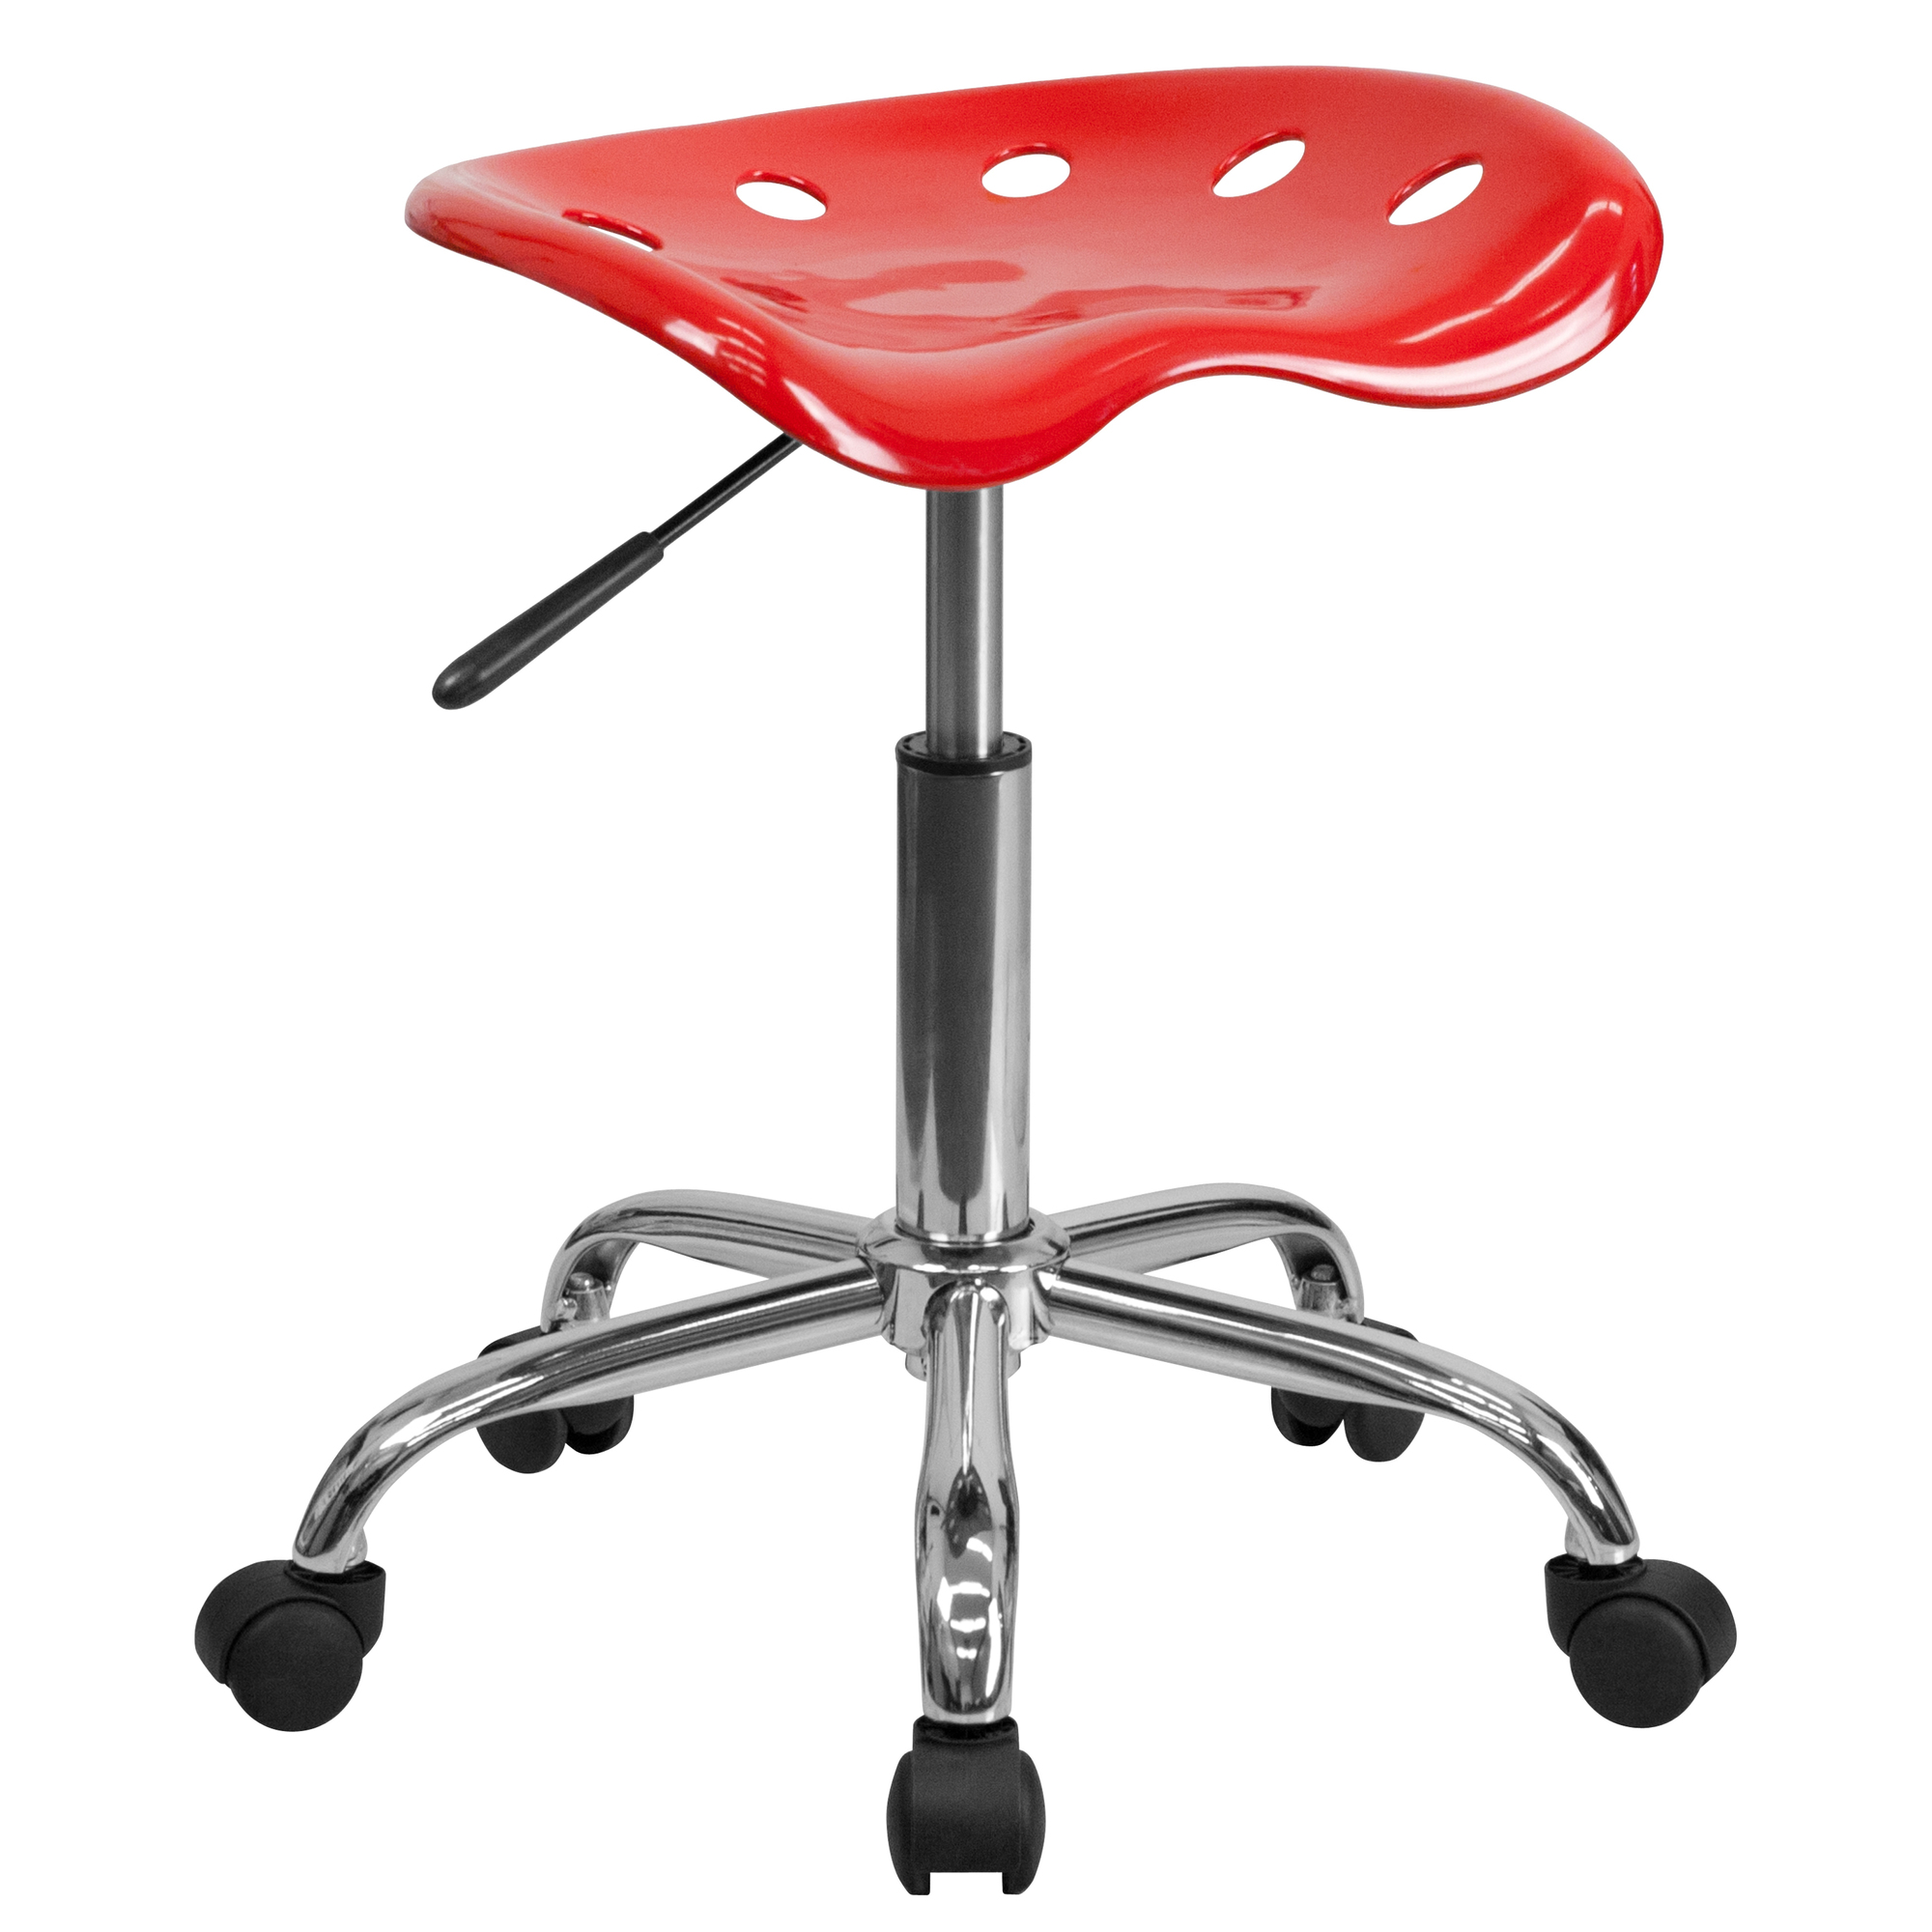 Vibrant Red Tractor Seat and Chrome Stool, Primary Color Red, Included (qty.) 1, Model - Flash Furniture LF214ARED